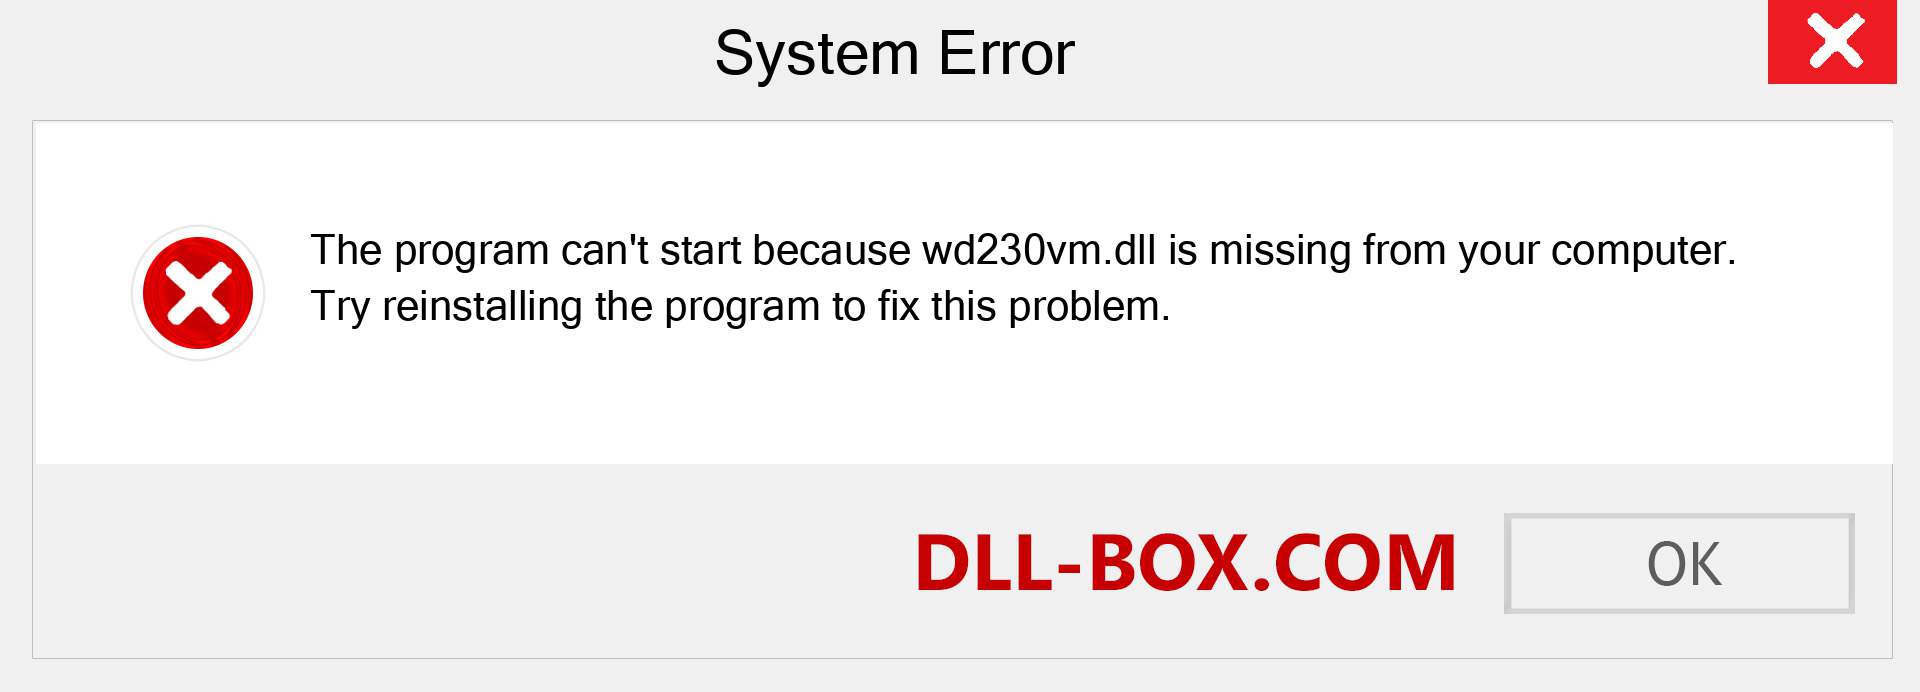  wd230vm.dll file is missing?. Download for Windows 7, 8, 10 - Fix  wd230vm dll Missing Error on Windows, photos, images